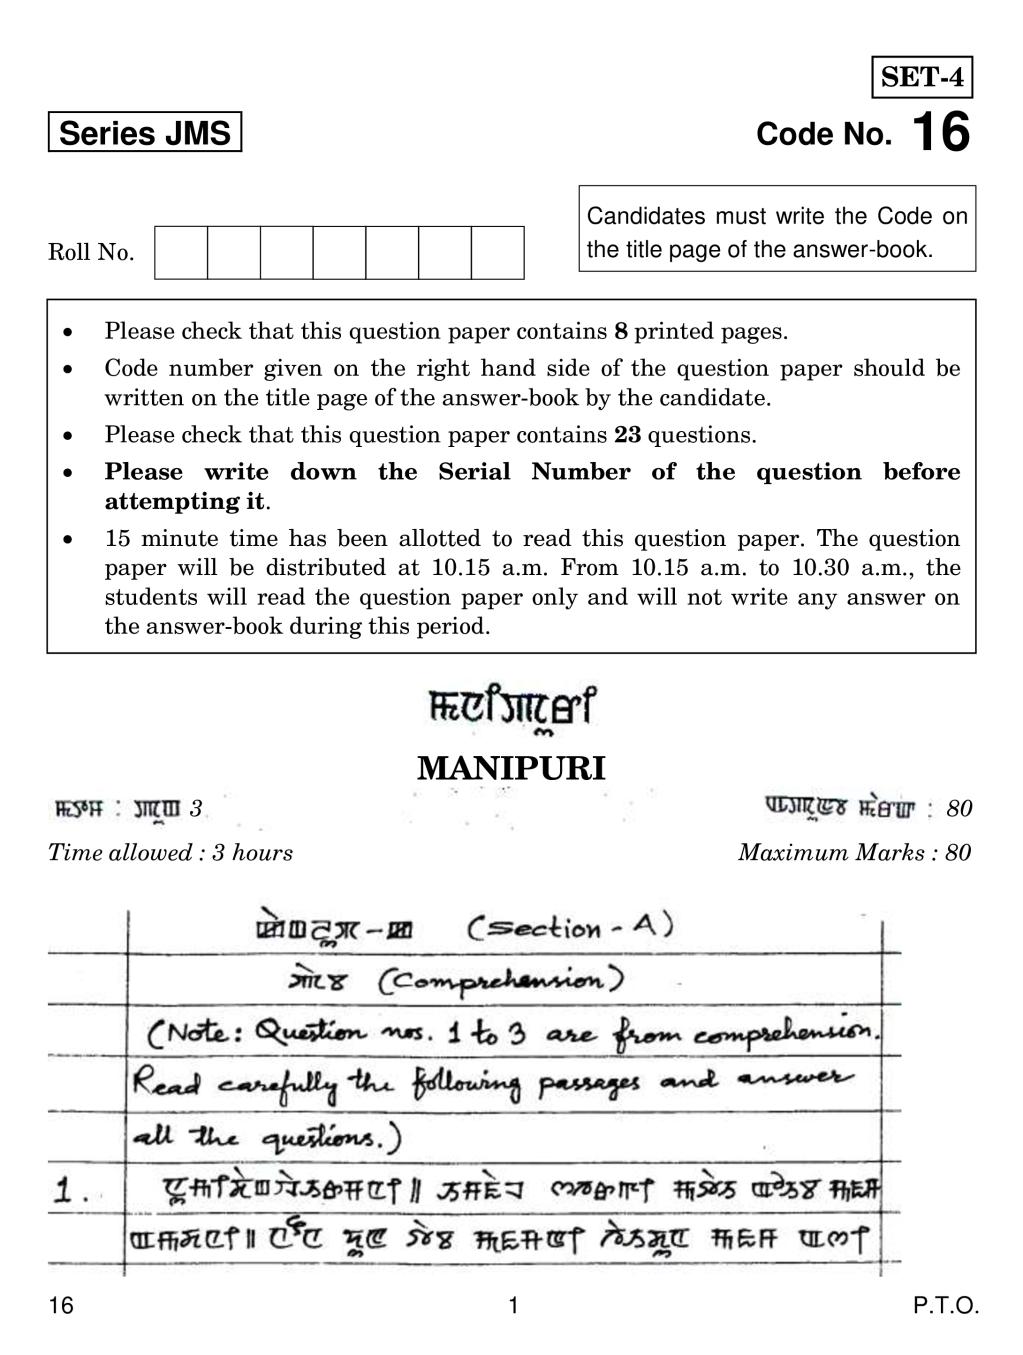 CBSE Class 10 Manipuri Question Paper 2019 - Page 1